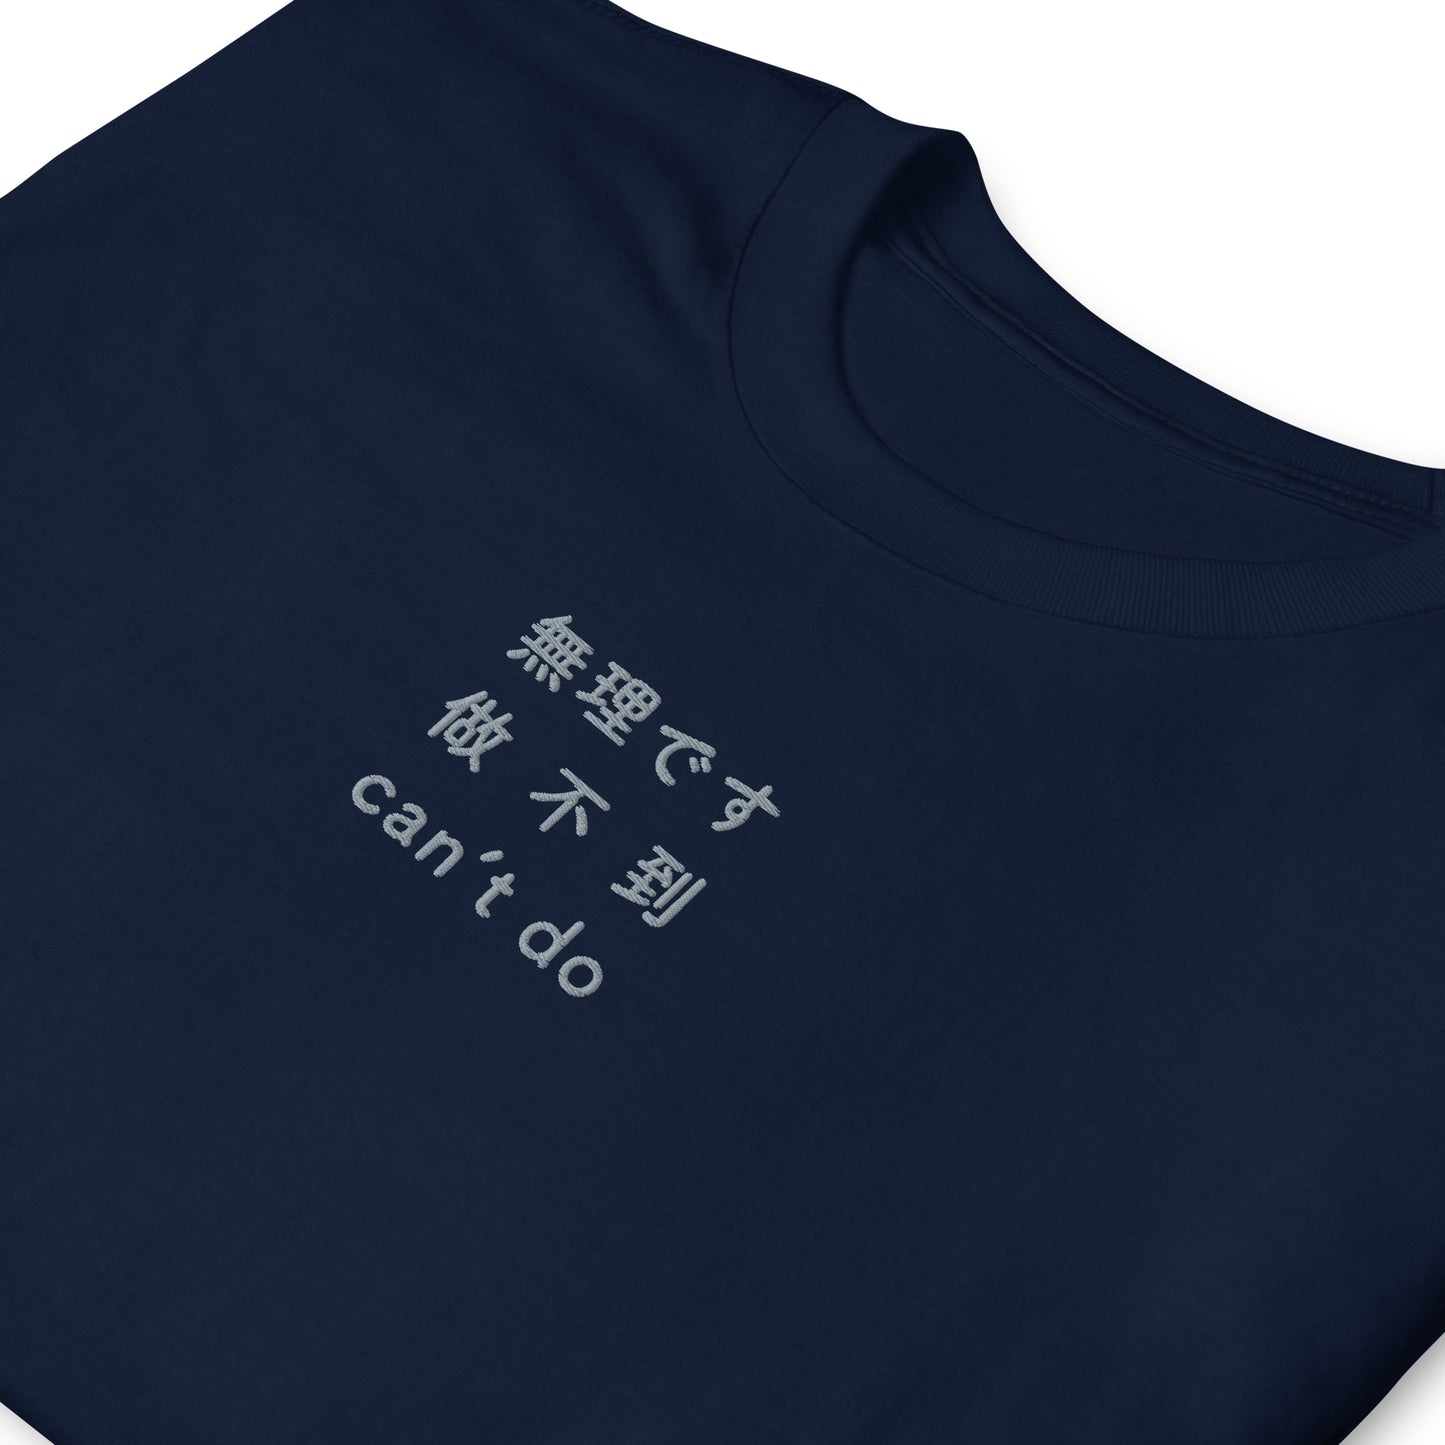 Navy High Quality Tee - Front Design with an Light Gray Embroidery "Can't Do" in Japanese, Chinese and English